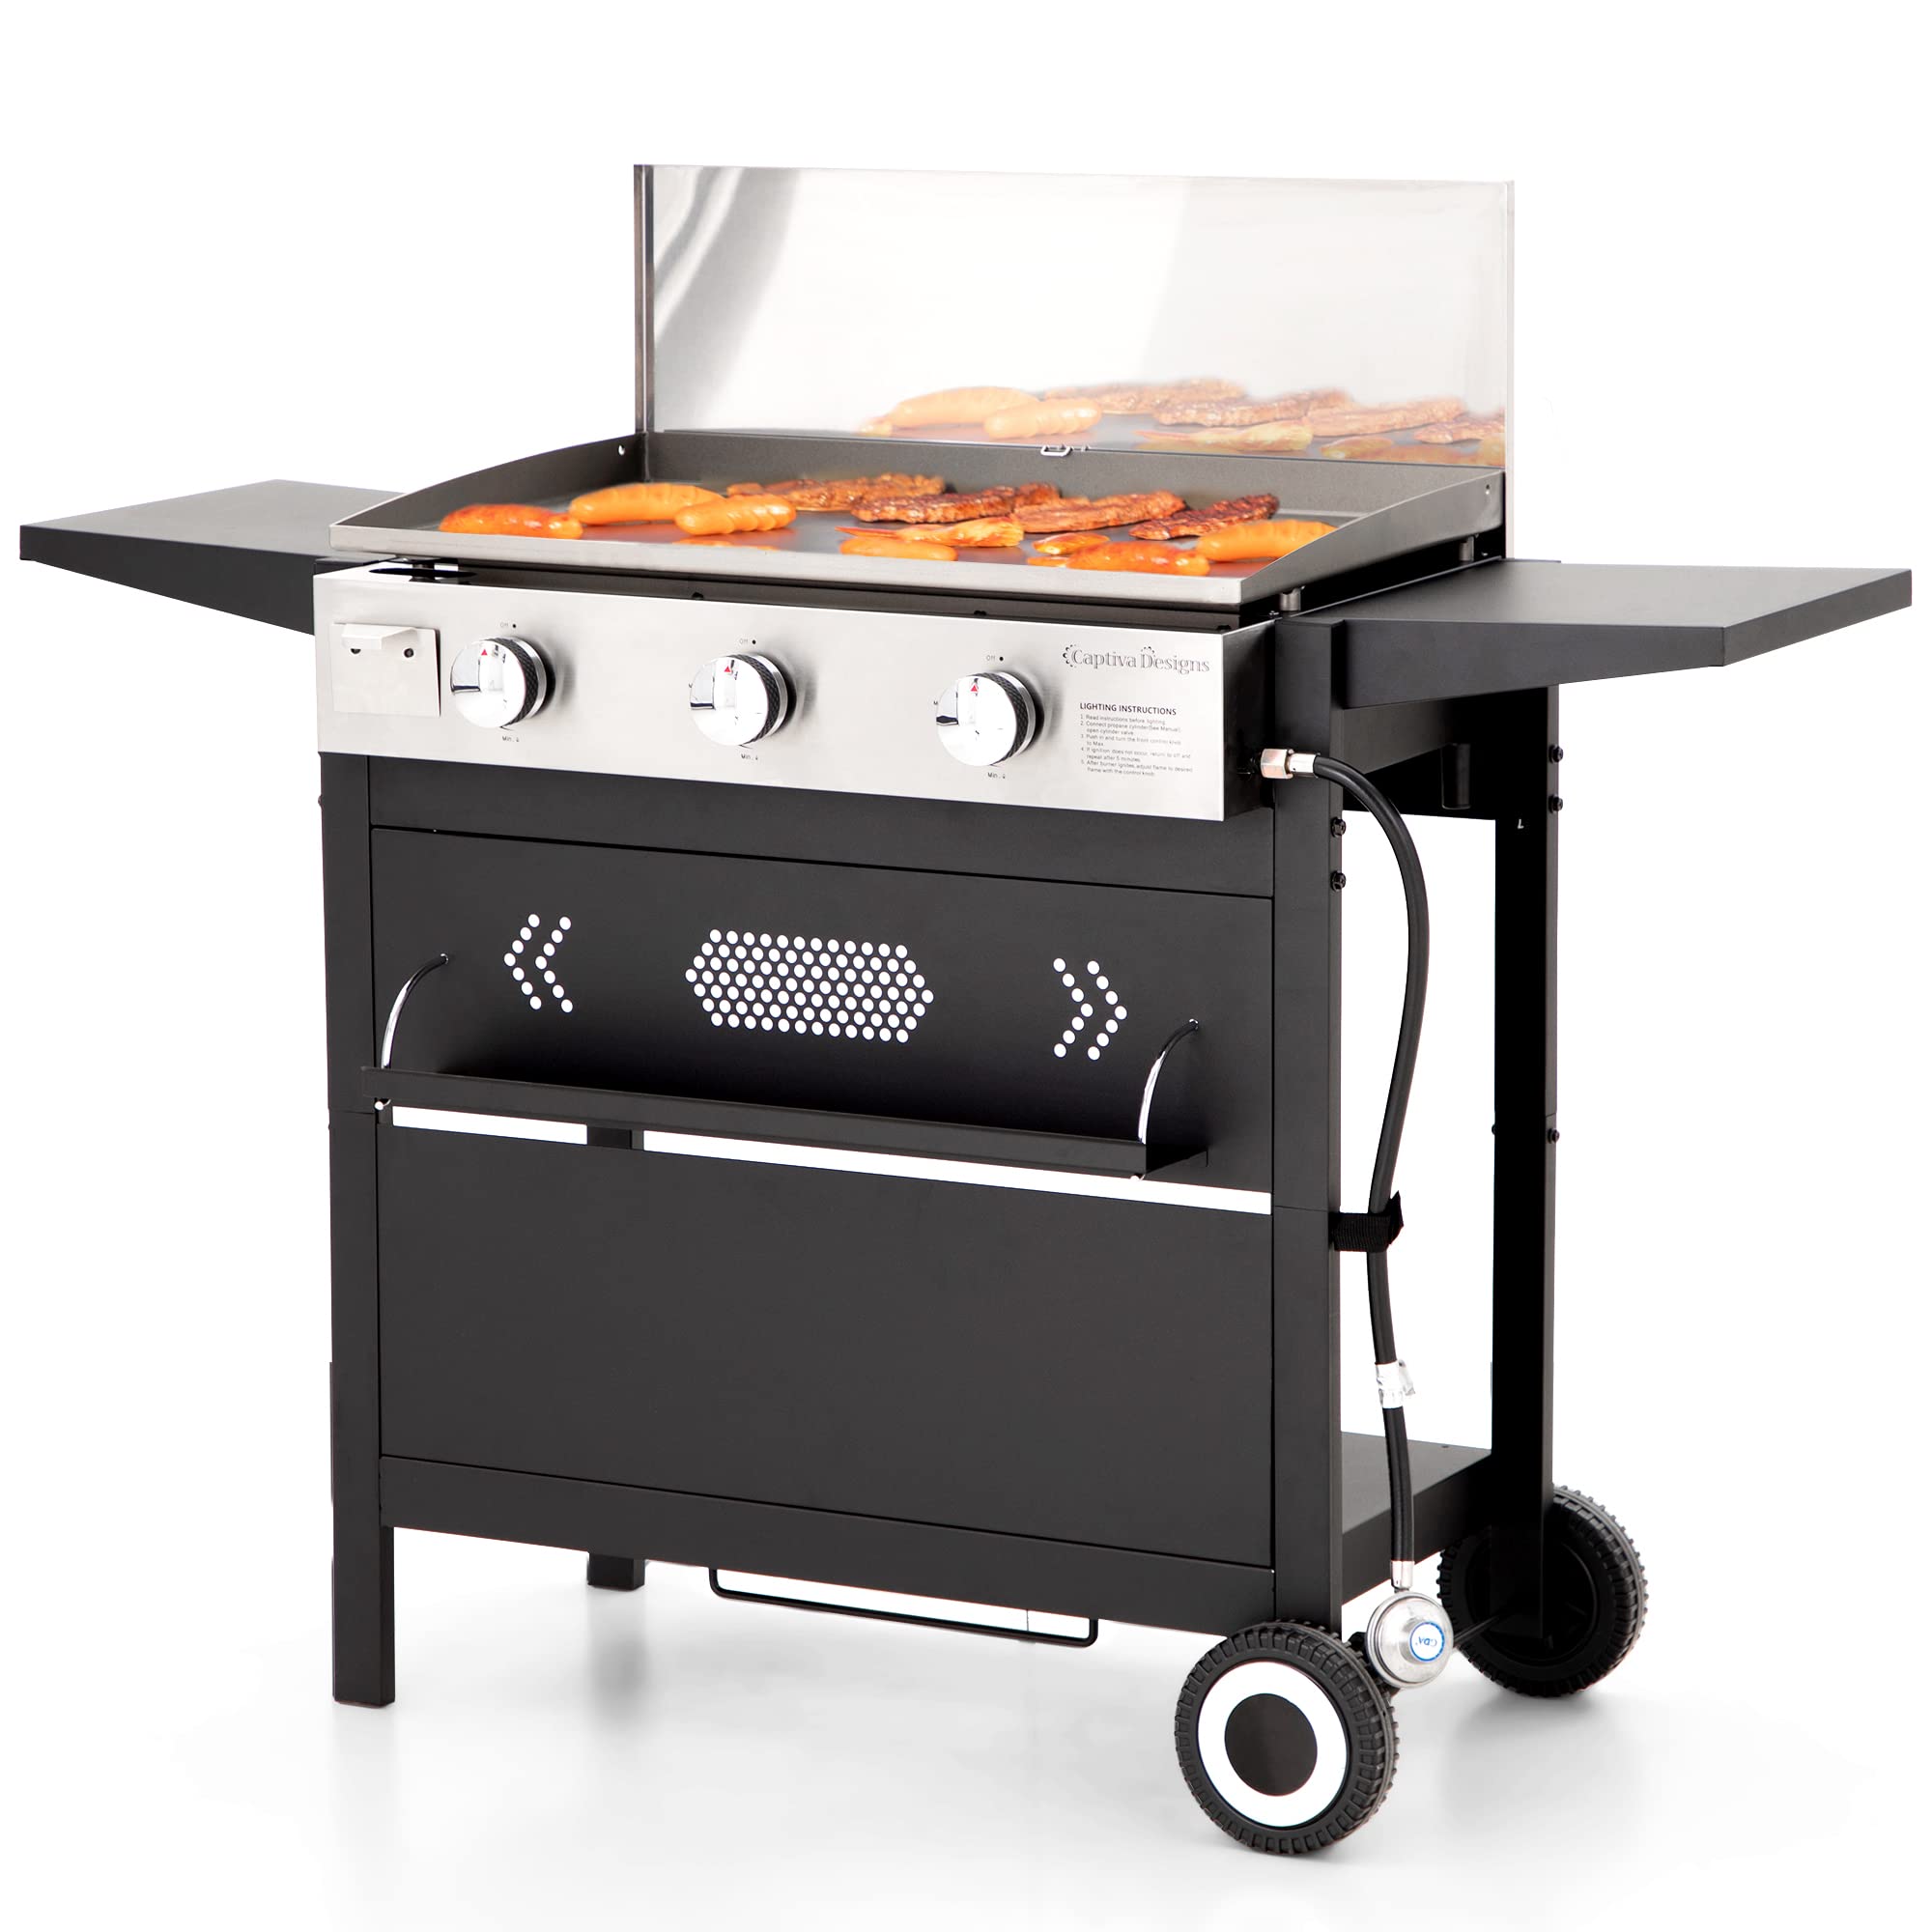 Captiva Designs Flat Top Gas Griddle Grill with Lid, 3-Burner Propane Flattop BBQ for Outdoor Cooking Kitchen, Can be Detached into Table Camping & Tailgating, 33,000 BTU Output